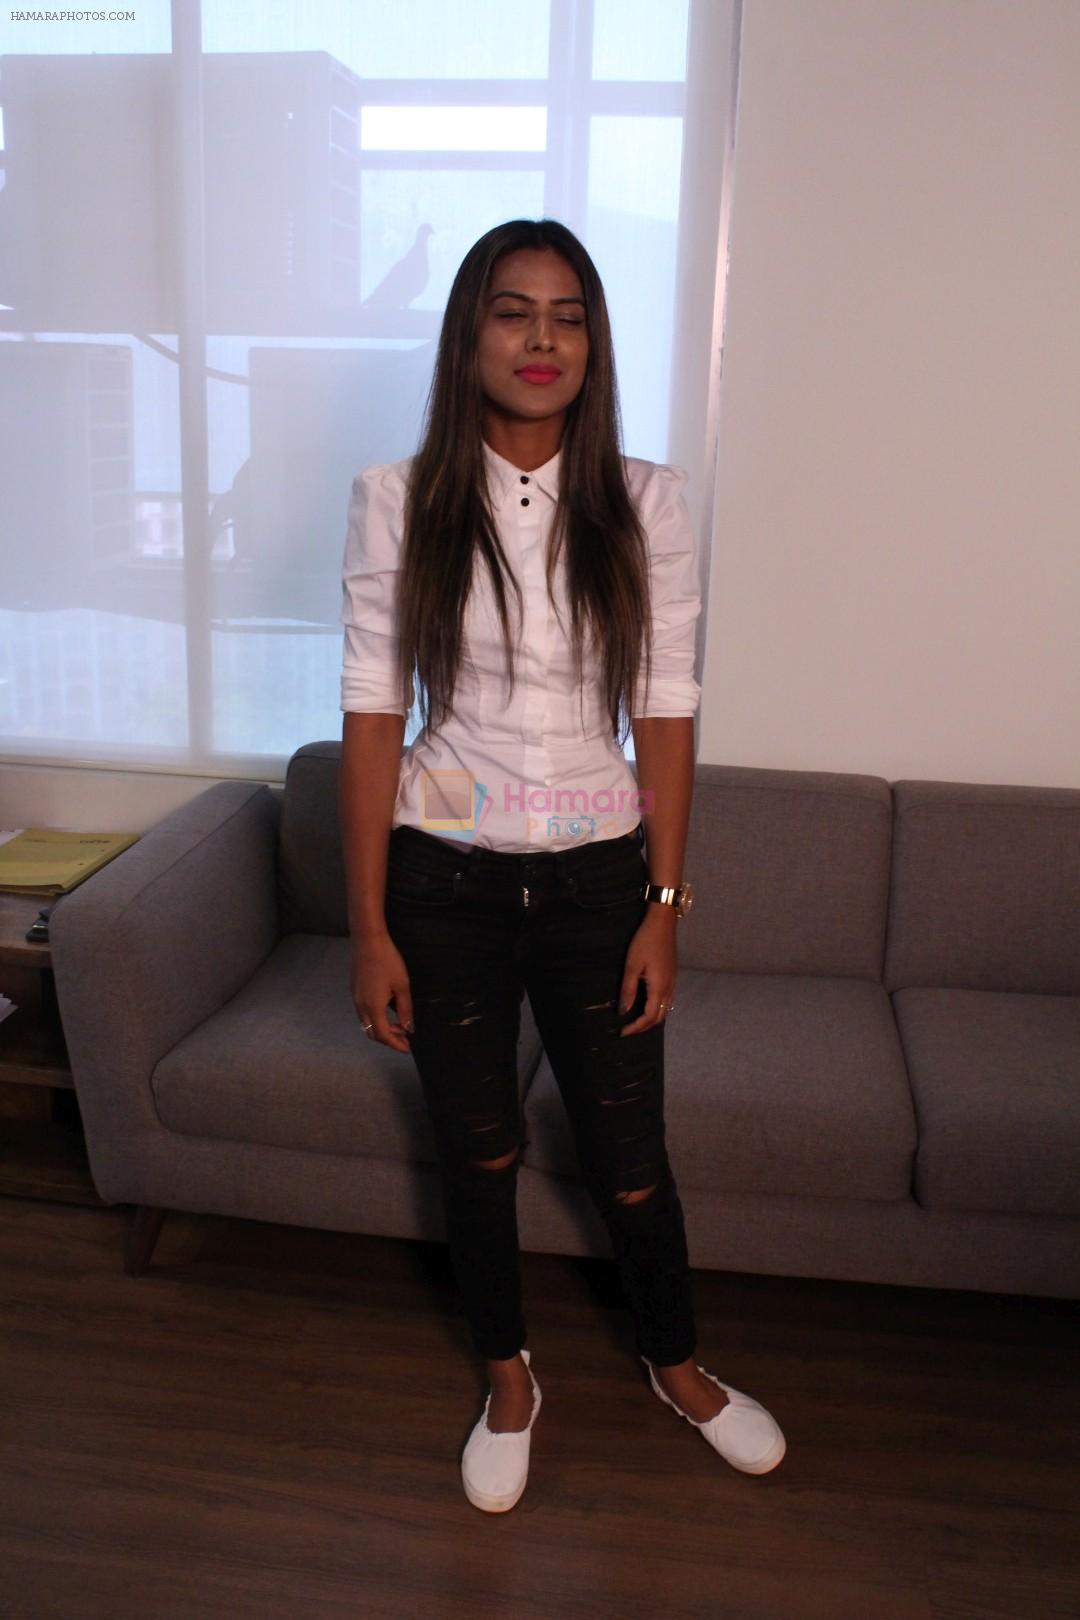 Nia Sharma at an Interview For Web Series Twisted on 25th March 2017